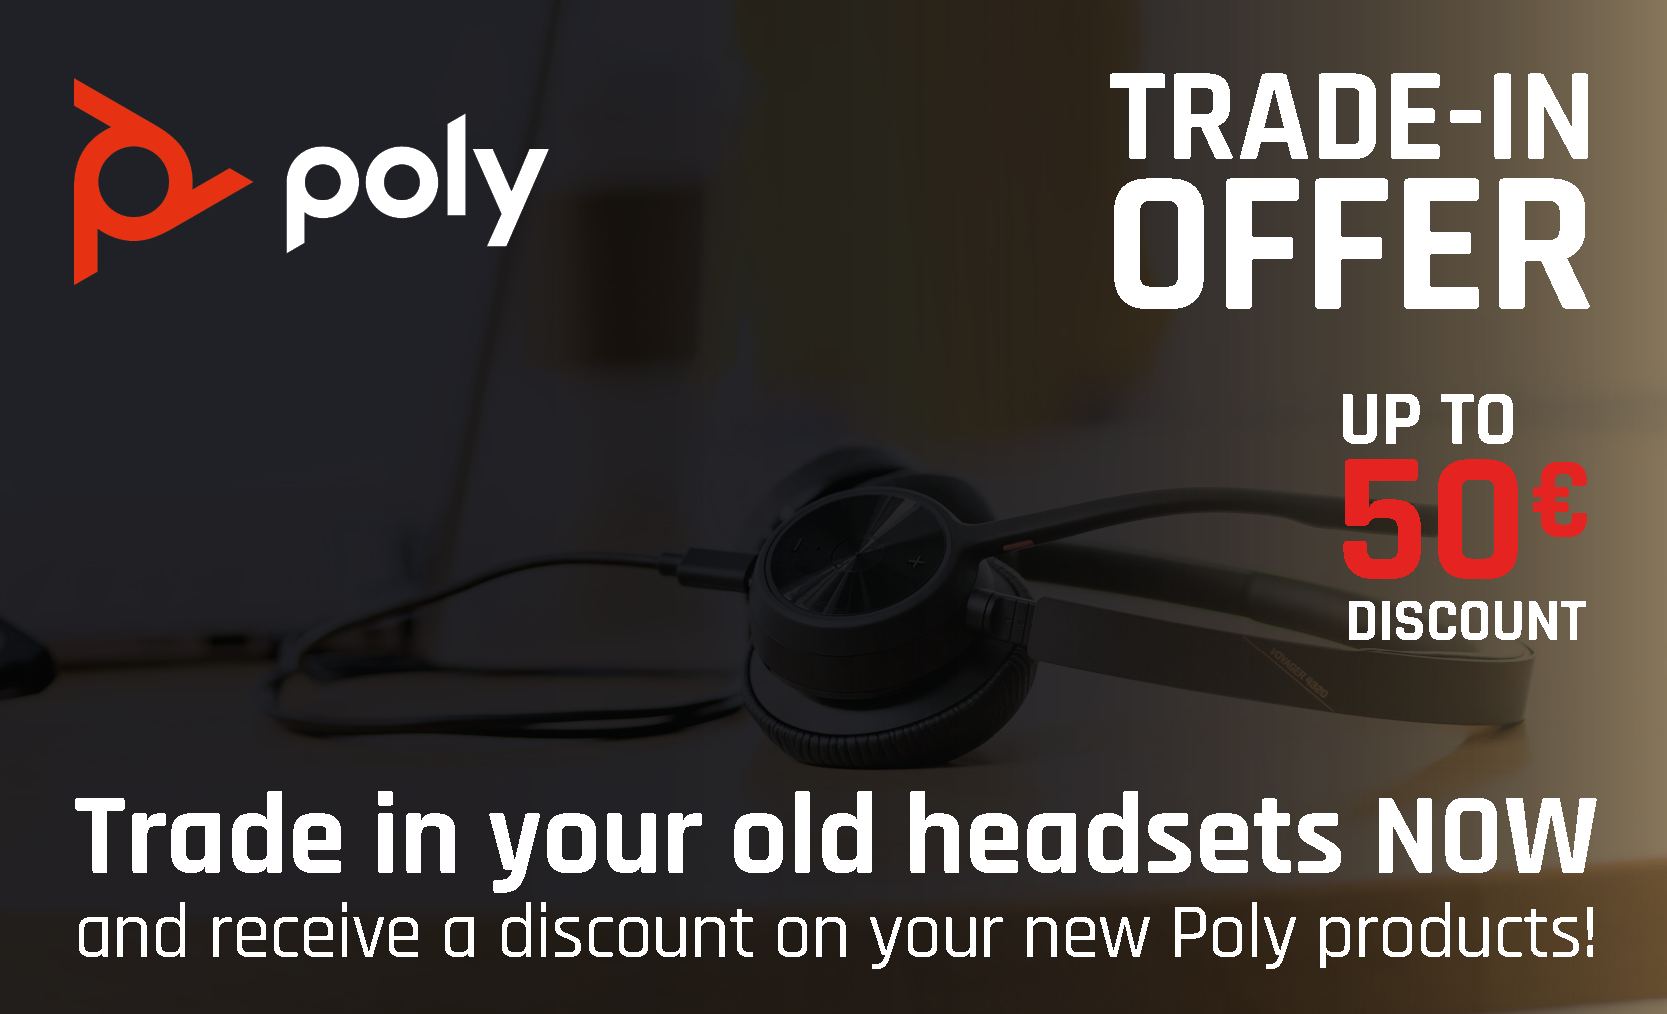 Poly Trade-in OFFER!